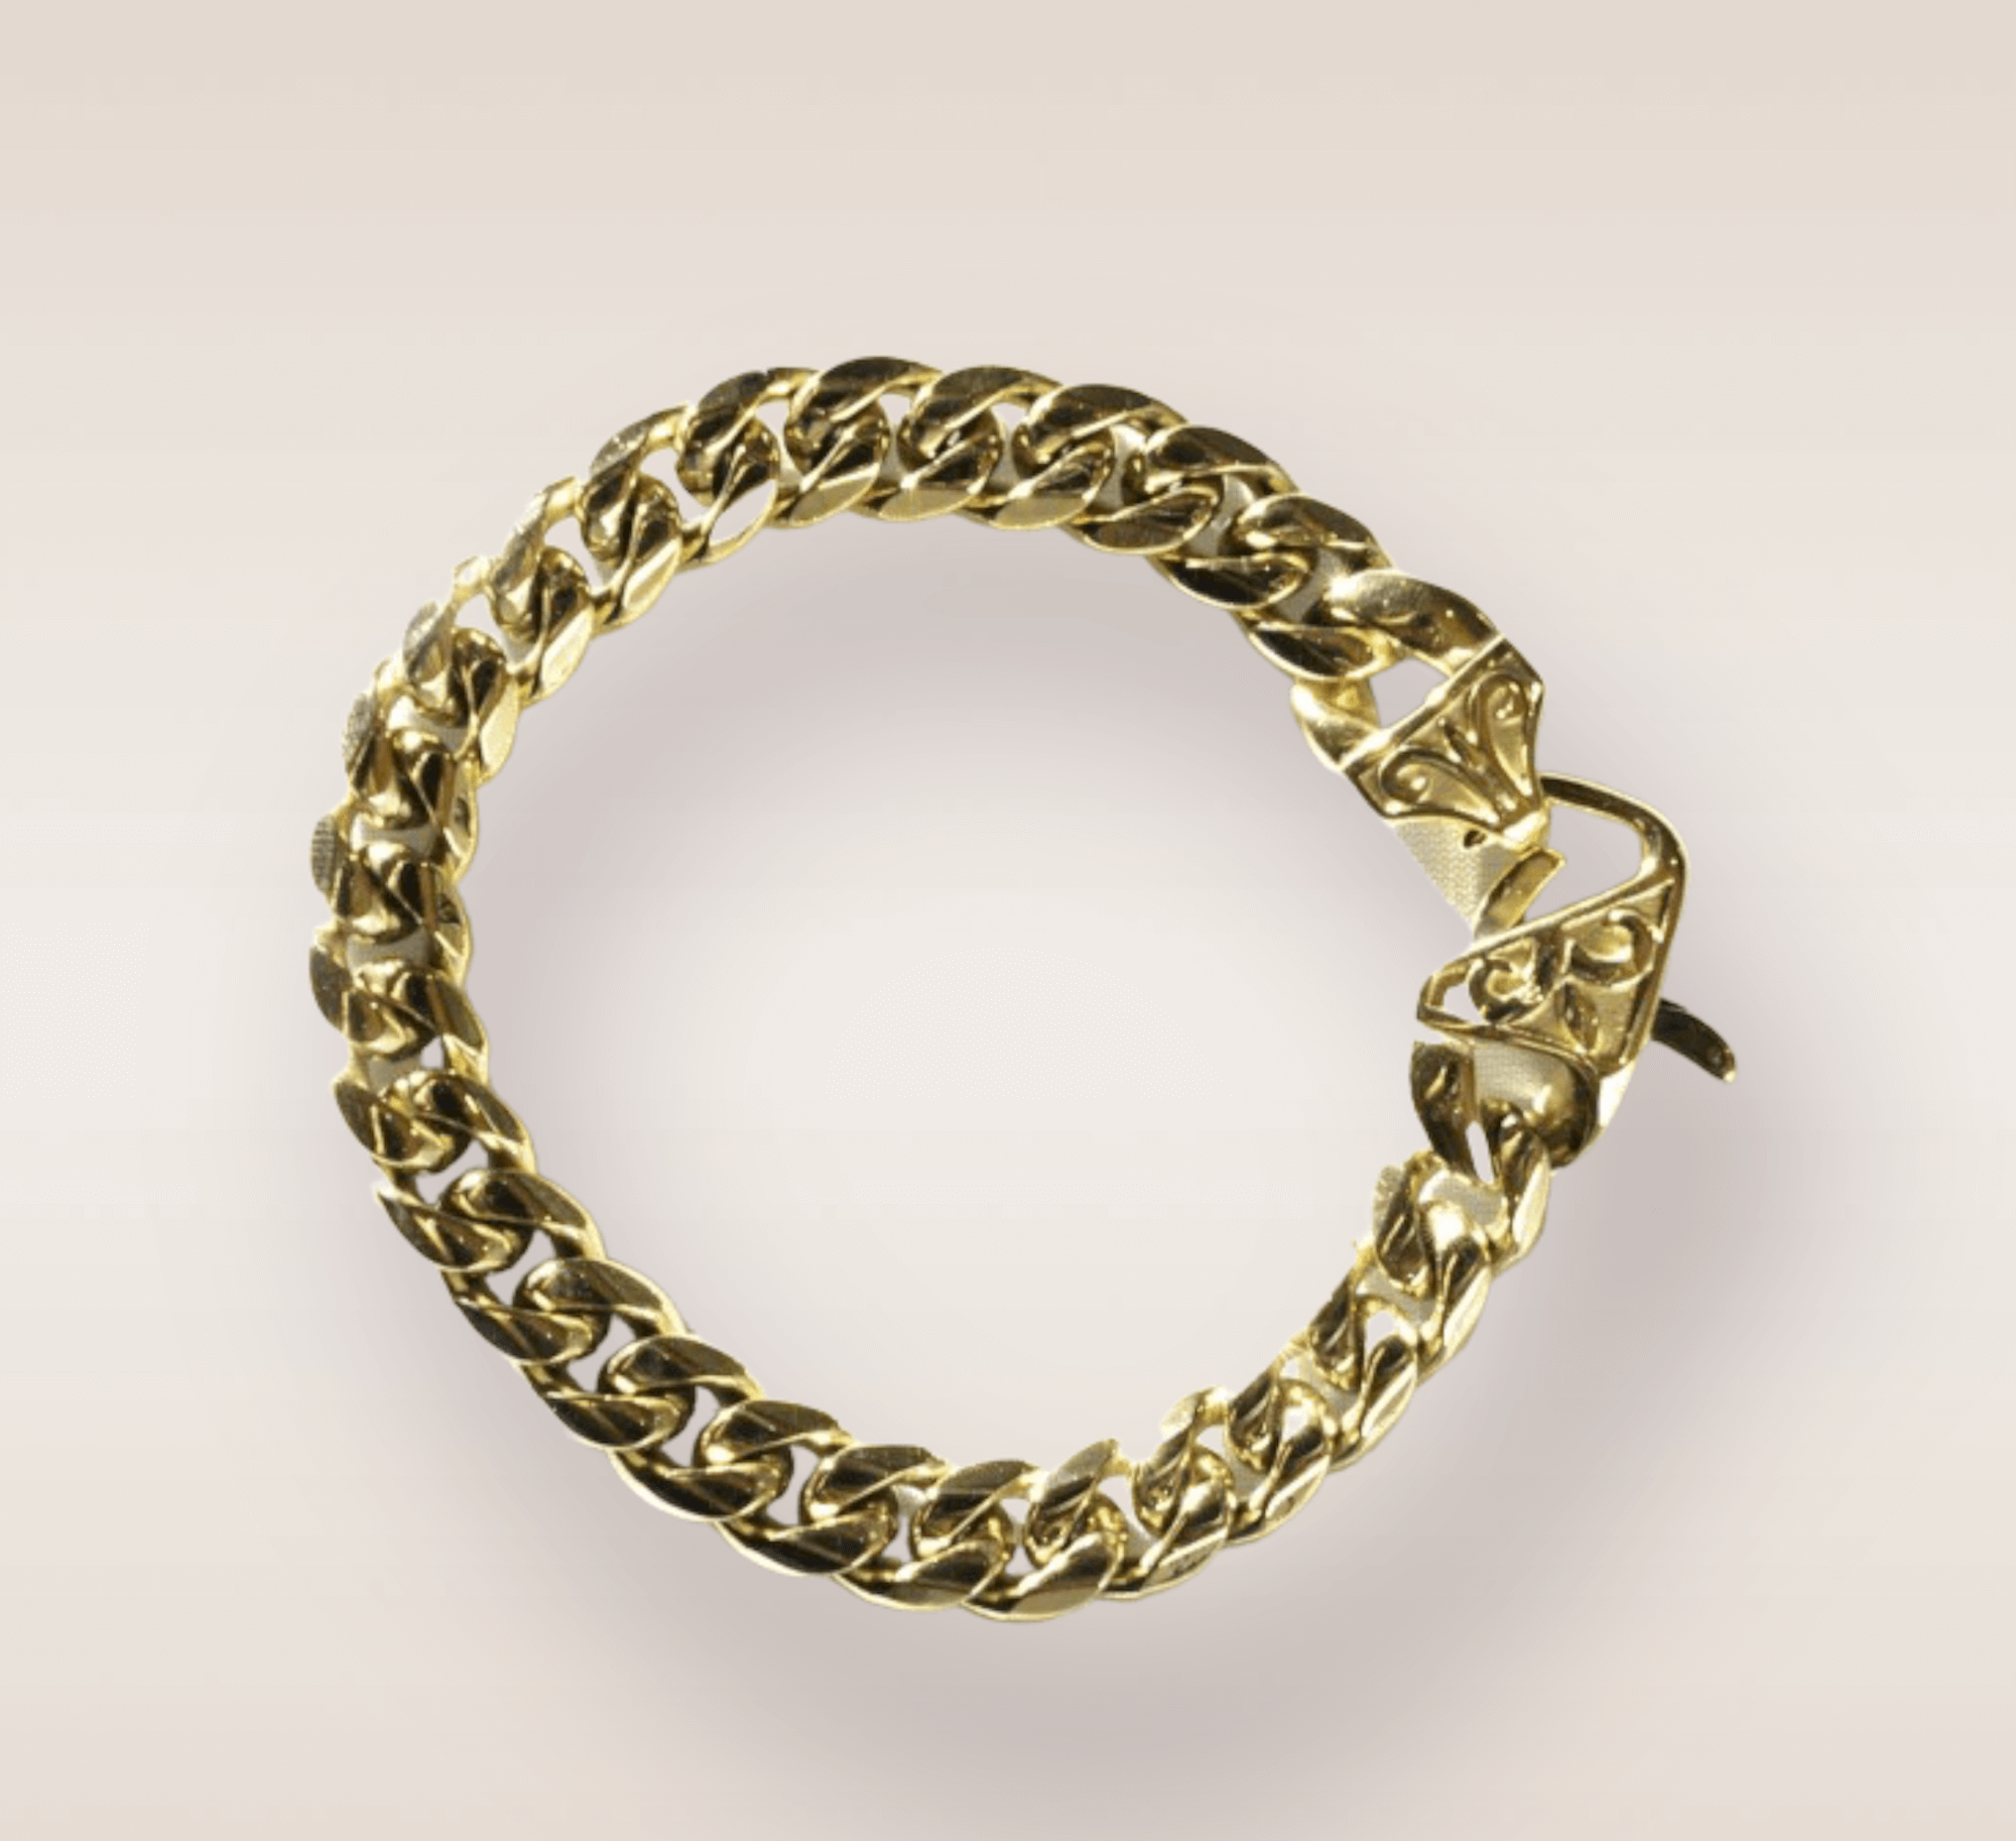 In this close-up shot, is the Sneaky Gold Link, a mesmerizing piece of jewelry that radiates opulence and allure. The golden cuban link captures the viewer's attention with its intricate and interlocking design.The gold hue exudes warmth and richness, elevating the overall aesthetic of the piece.